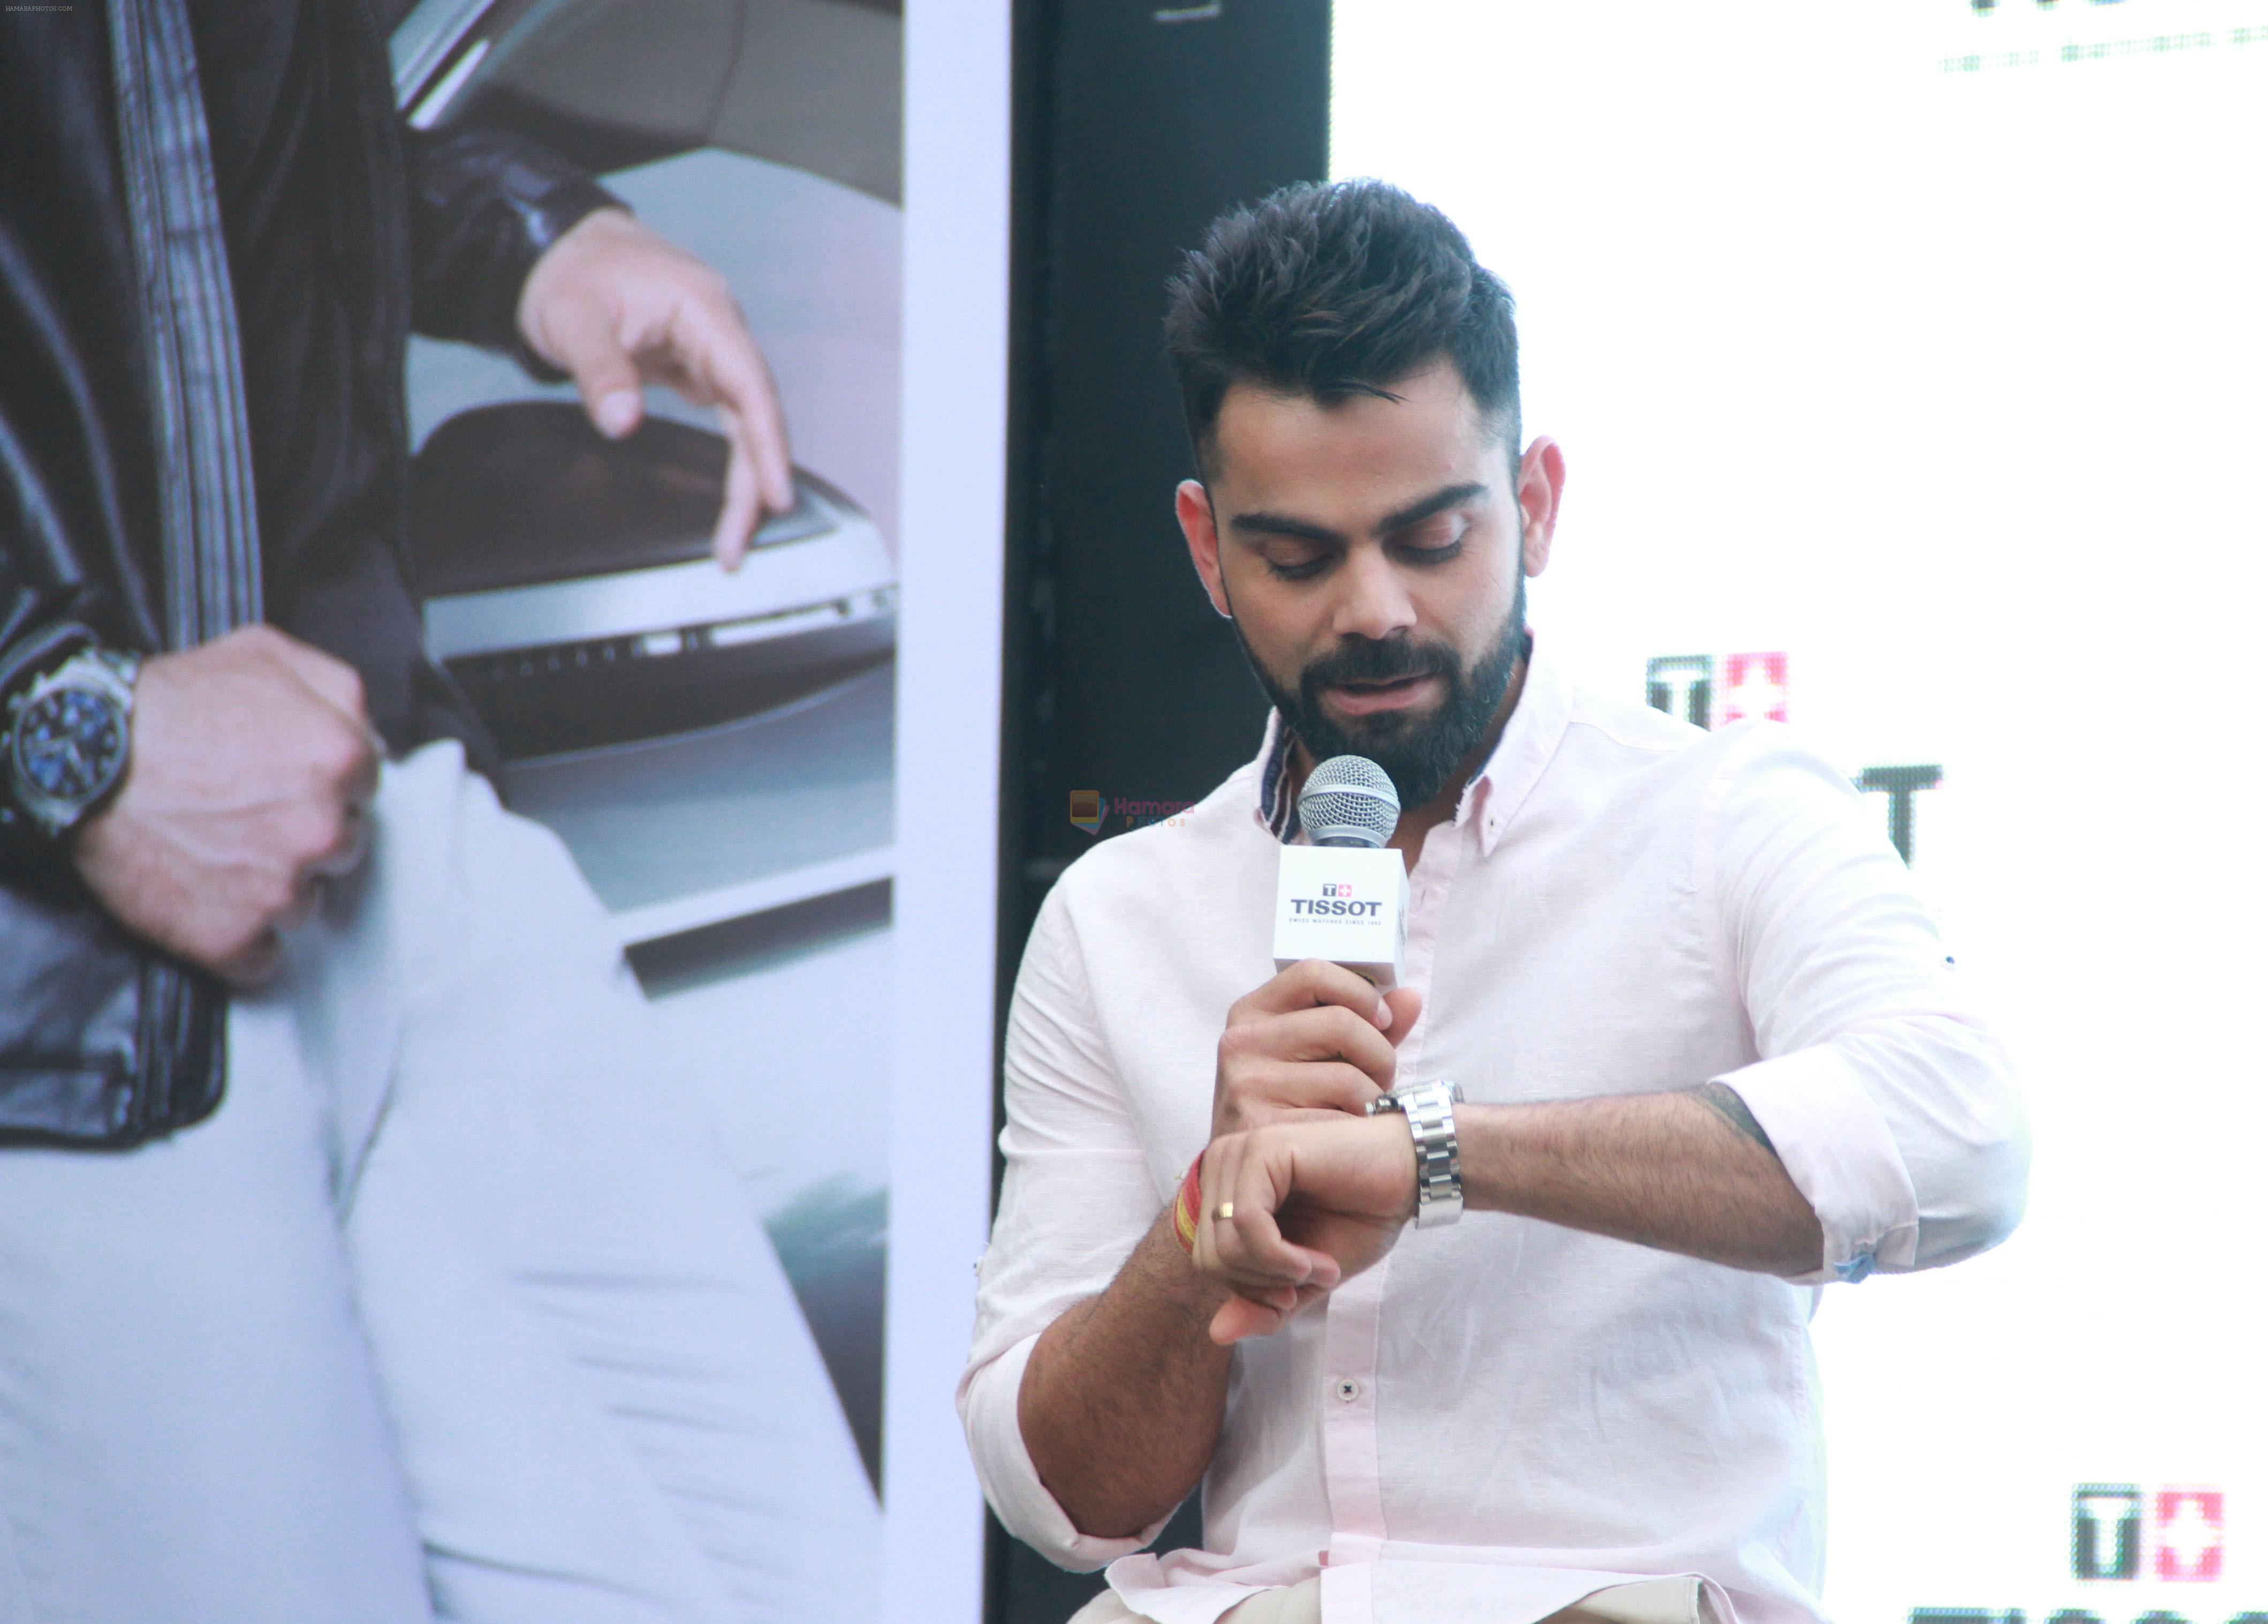 Virat Kohli at the Opening Of New Boutique Tissot An Swiss Watch Brand In Mumbai on 13th March 2018